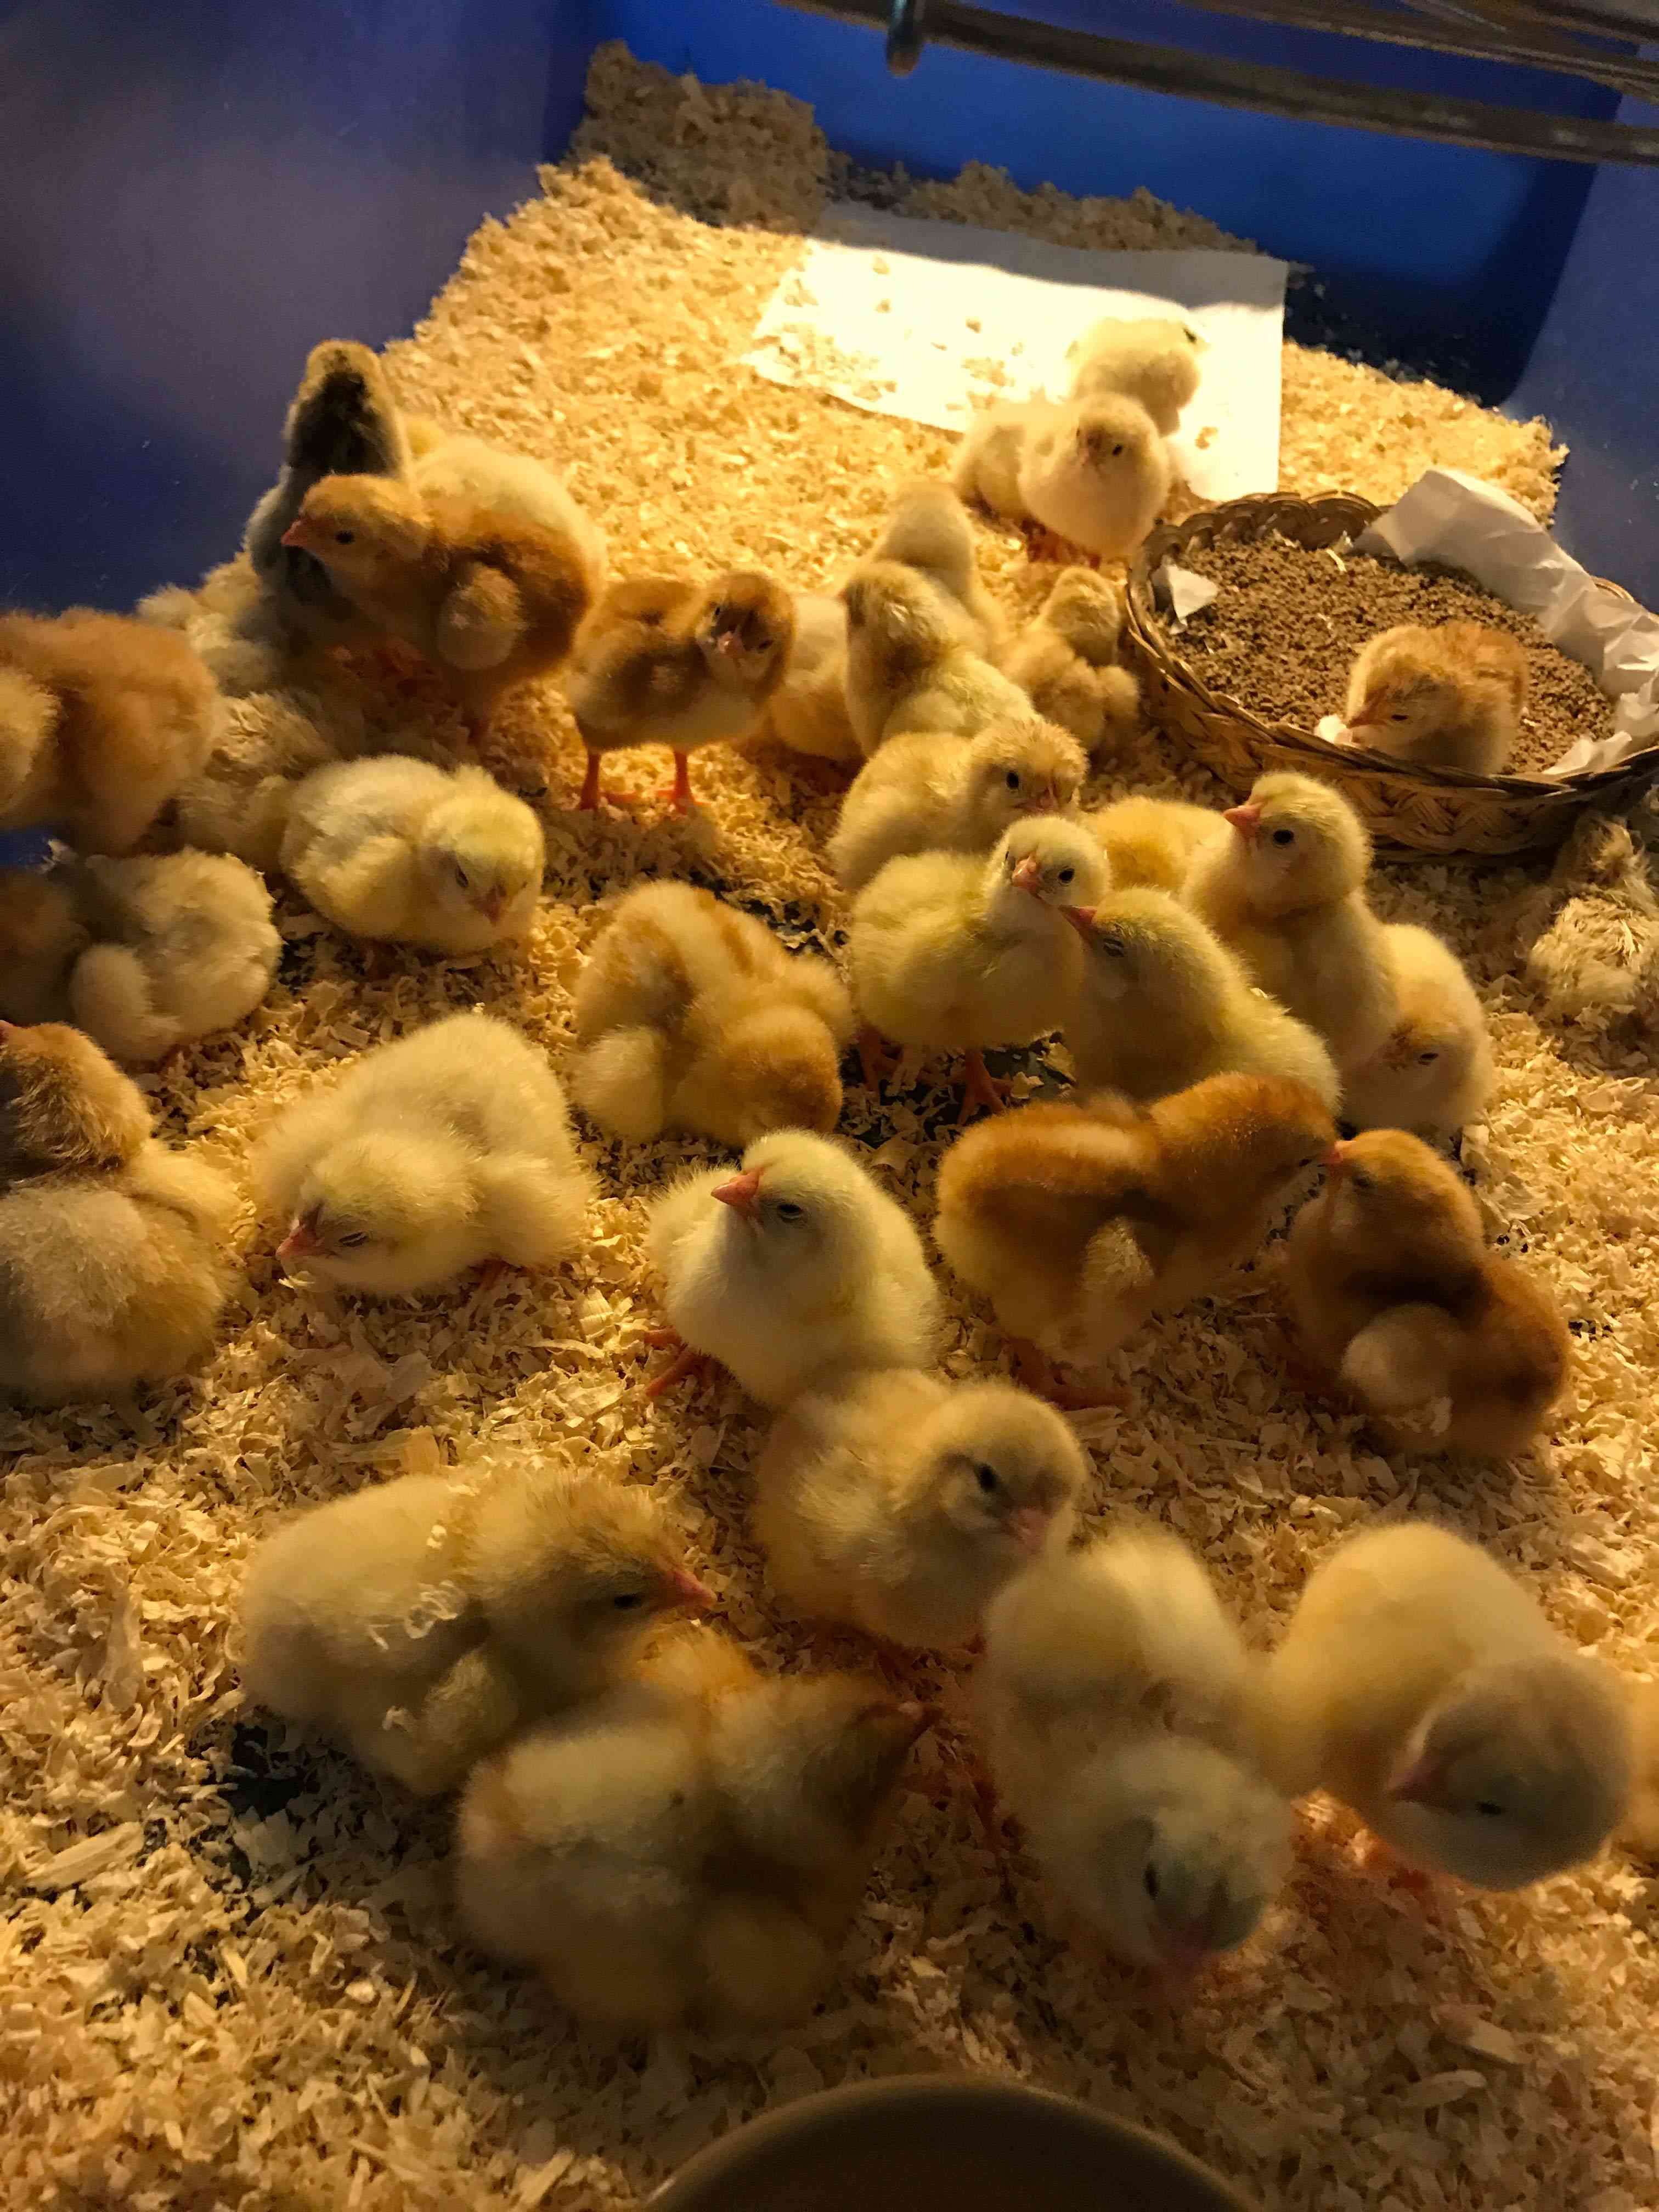 HATCH OF THE DAY: GalaBingo.com hosts live lottery game featuring hatching chicken eggs 